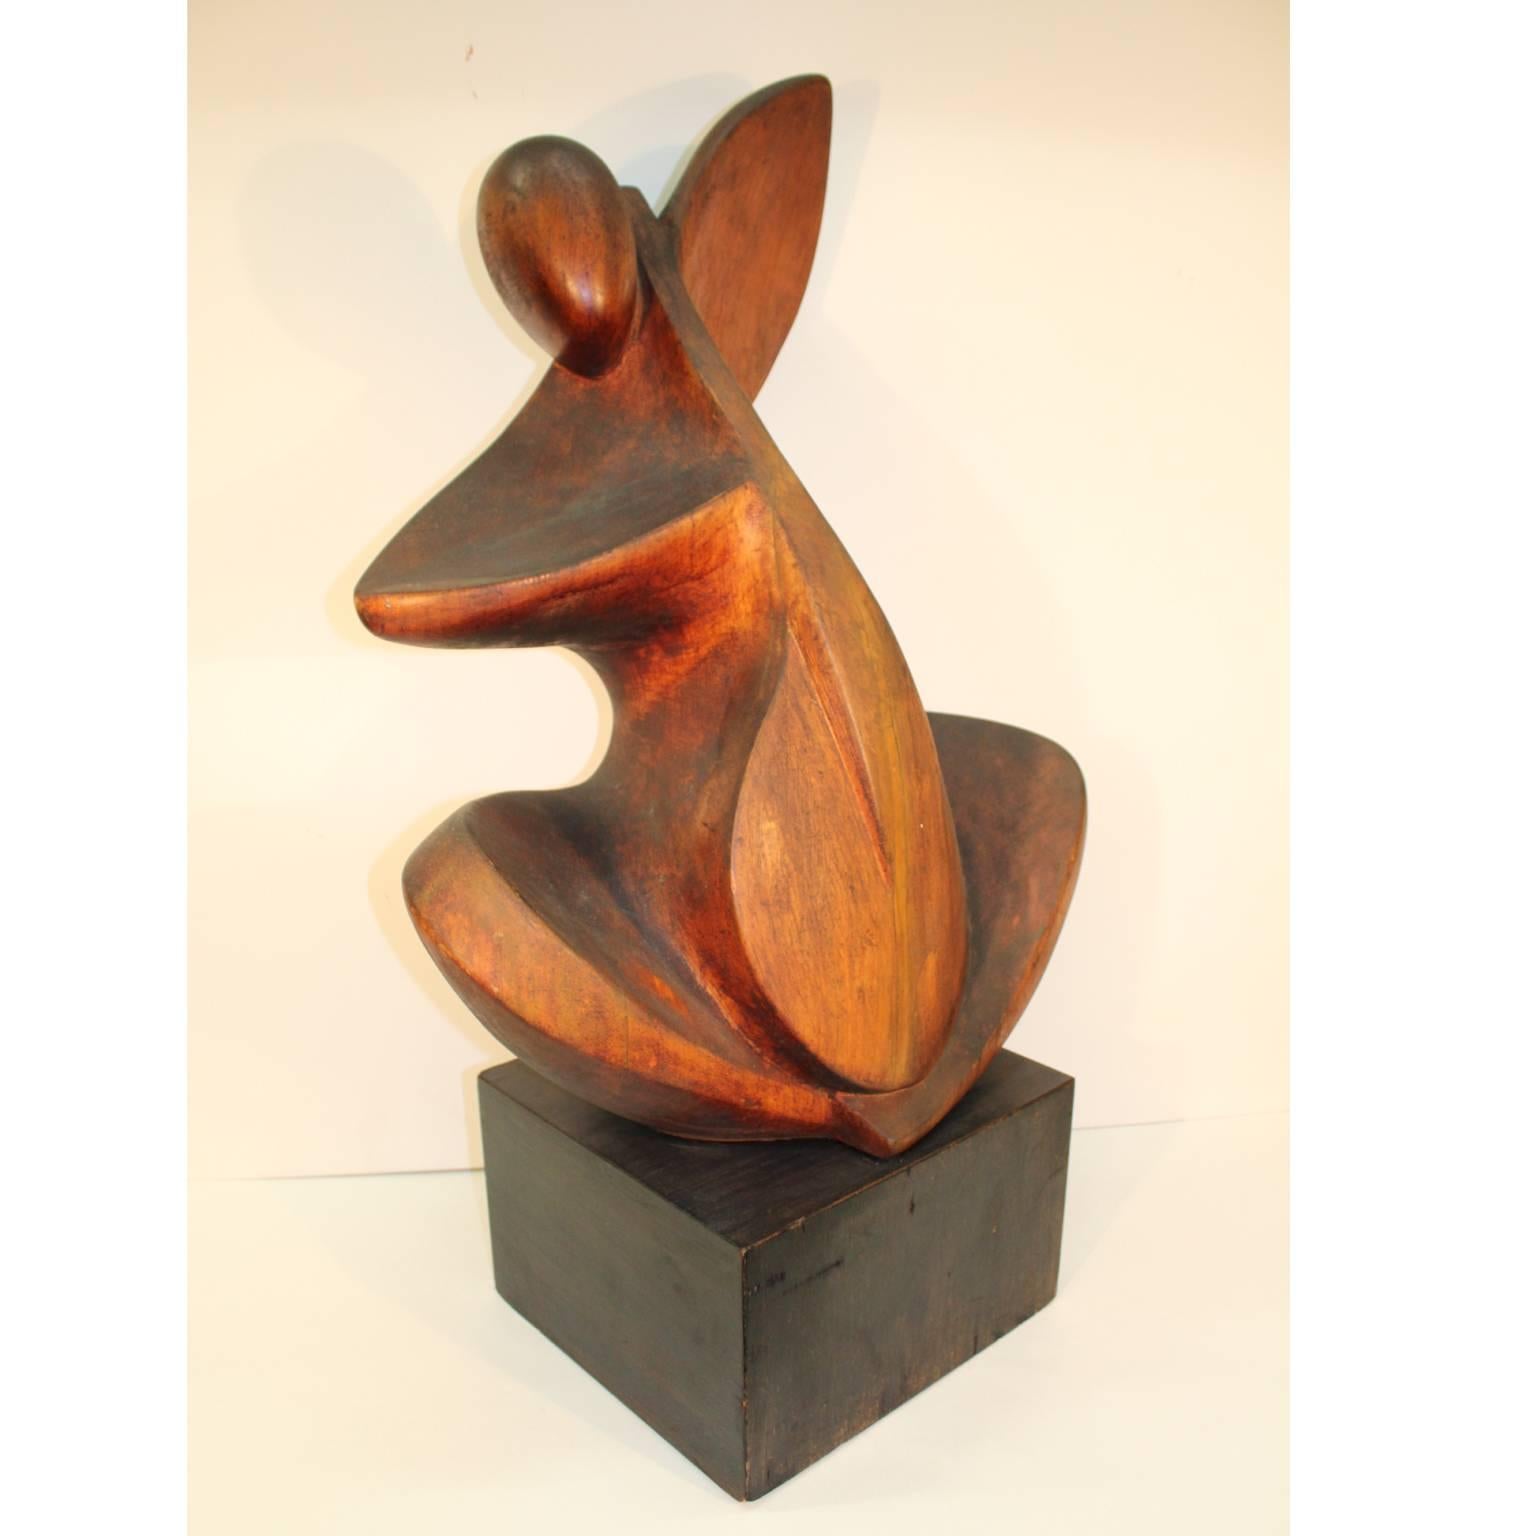 A carved walnut abstract sculpture of a Cello player by artist Joseph Martinek (American/Czech, 1915-1989), wood handcrafted during the 1930s-1940s in Chicago. The artists signature is on the back. Original stress cracks in front.